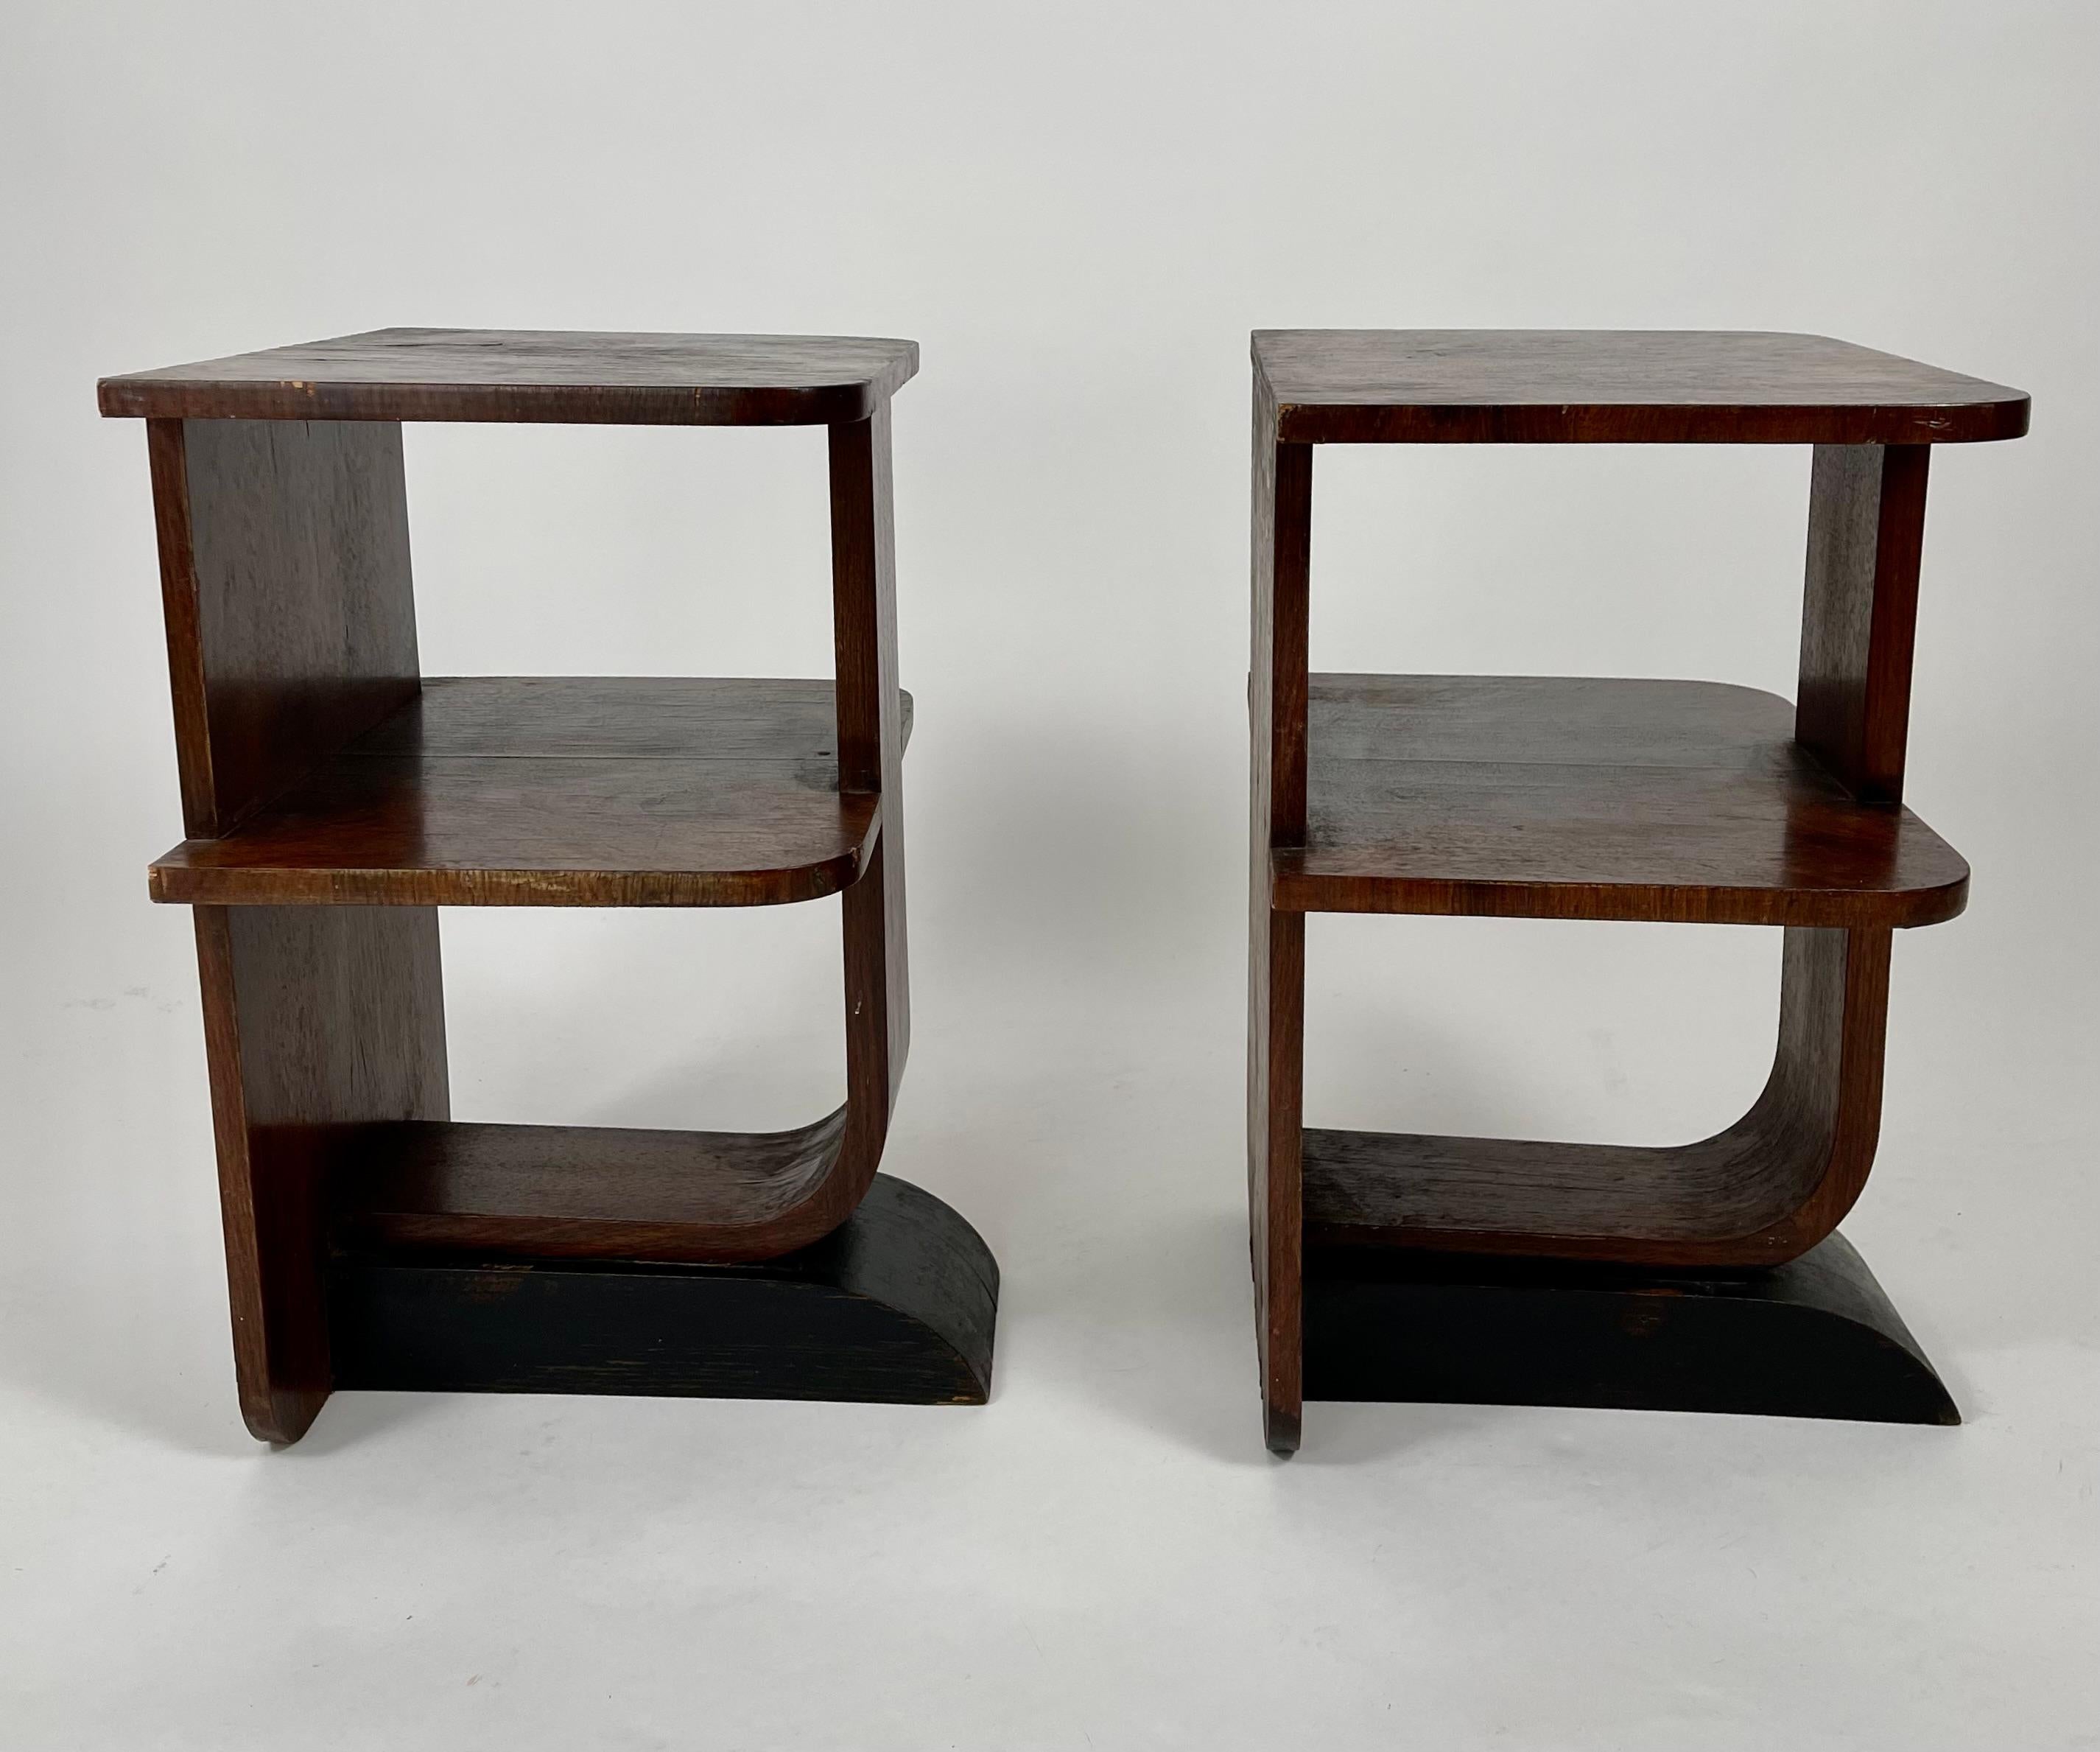 American Pair of Small Art Deco End Tables with Shelves